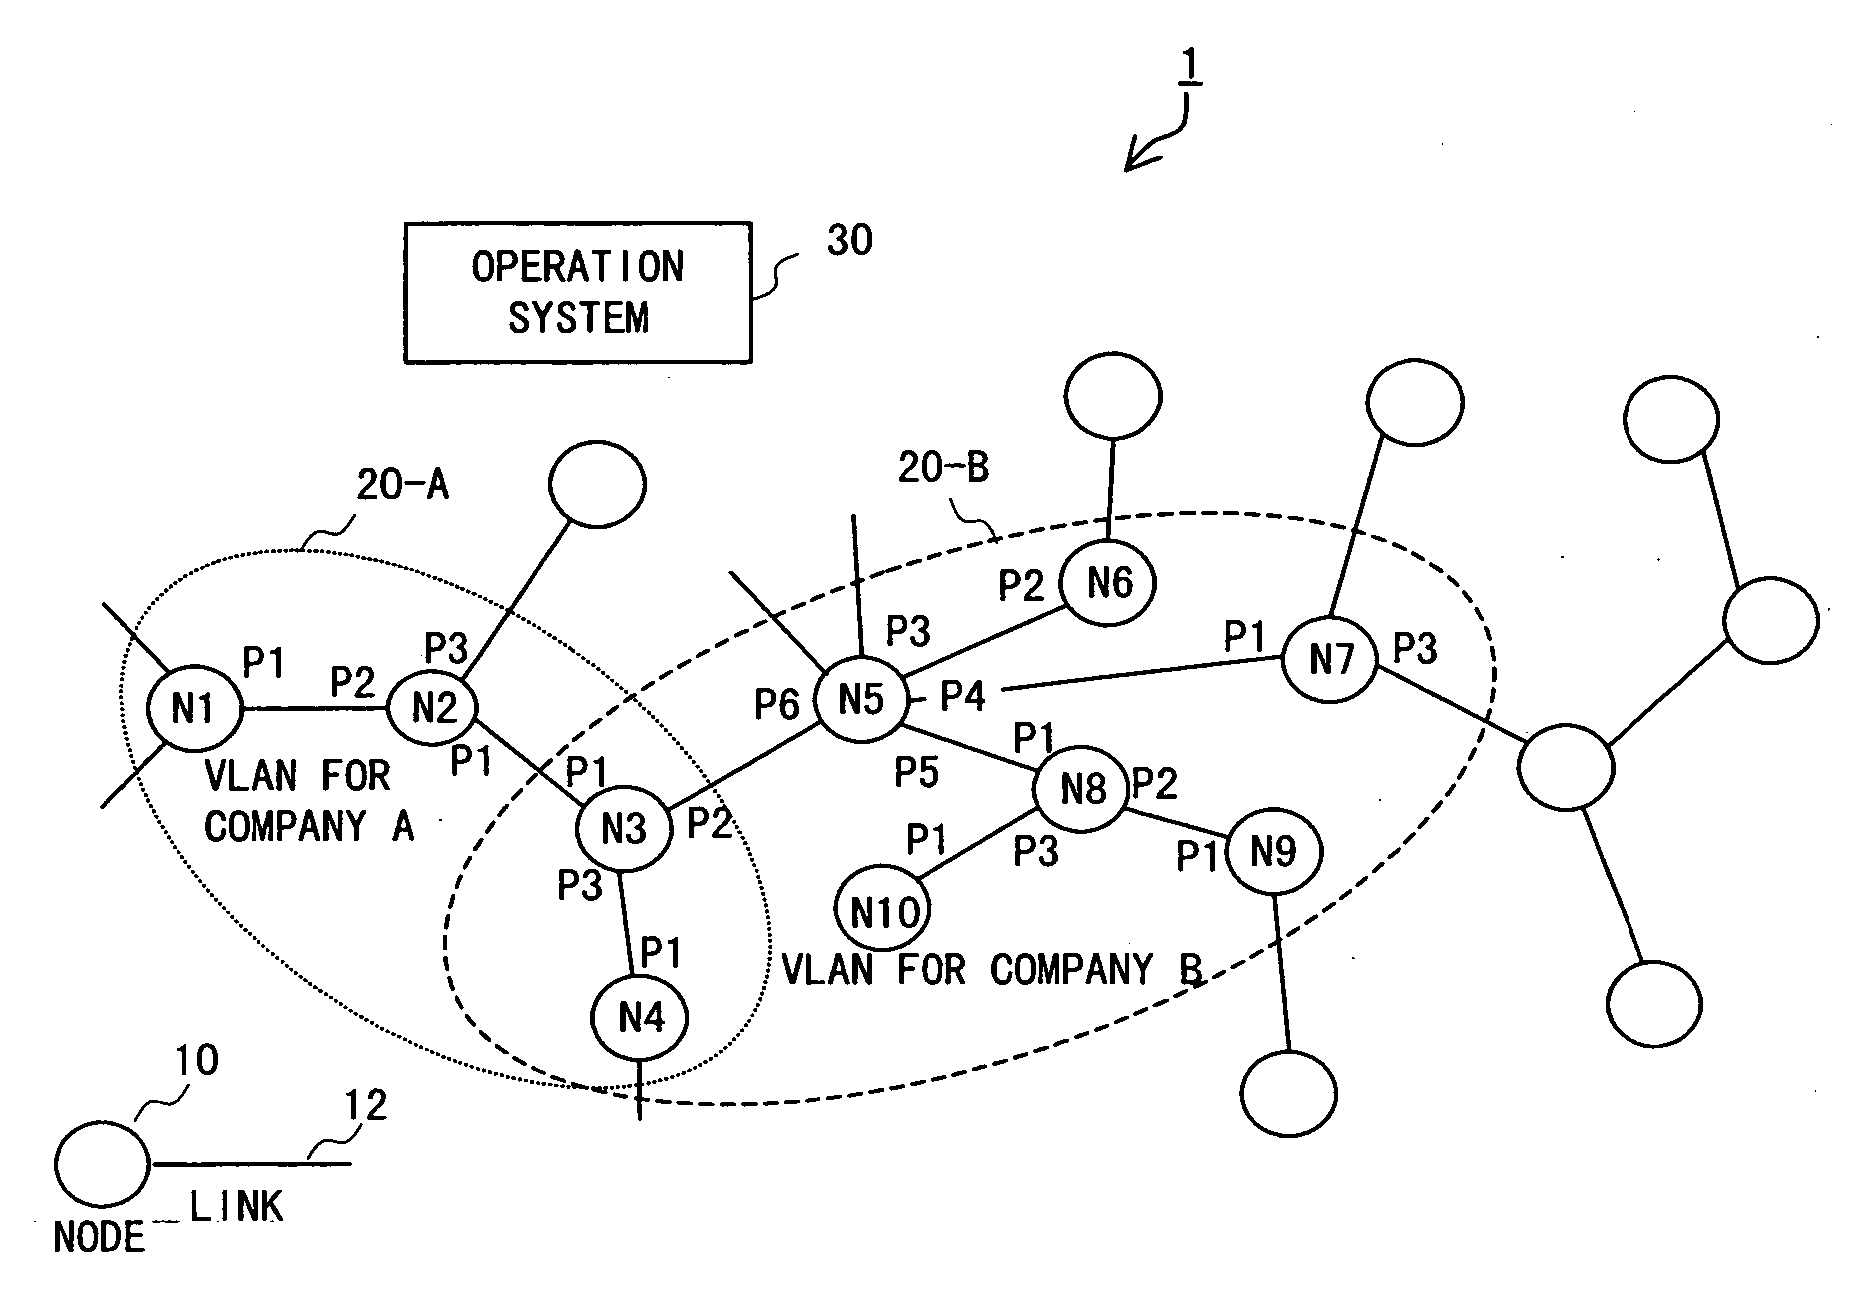 Method and apparatus for keeping track of virtual LAN topology in network of nodes